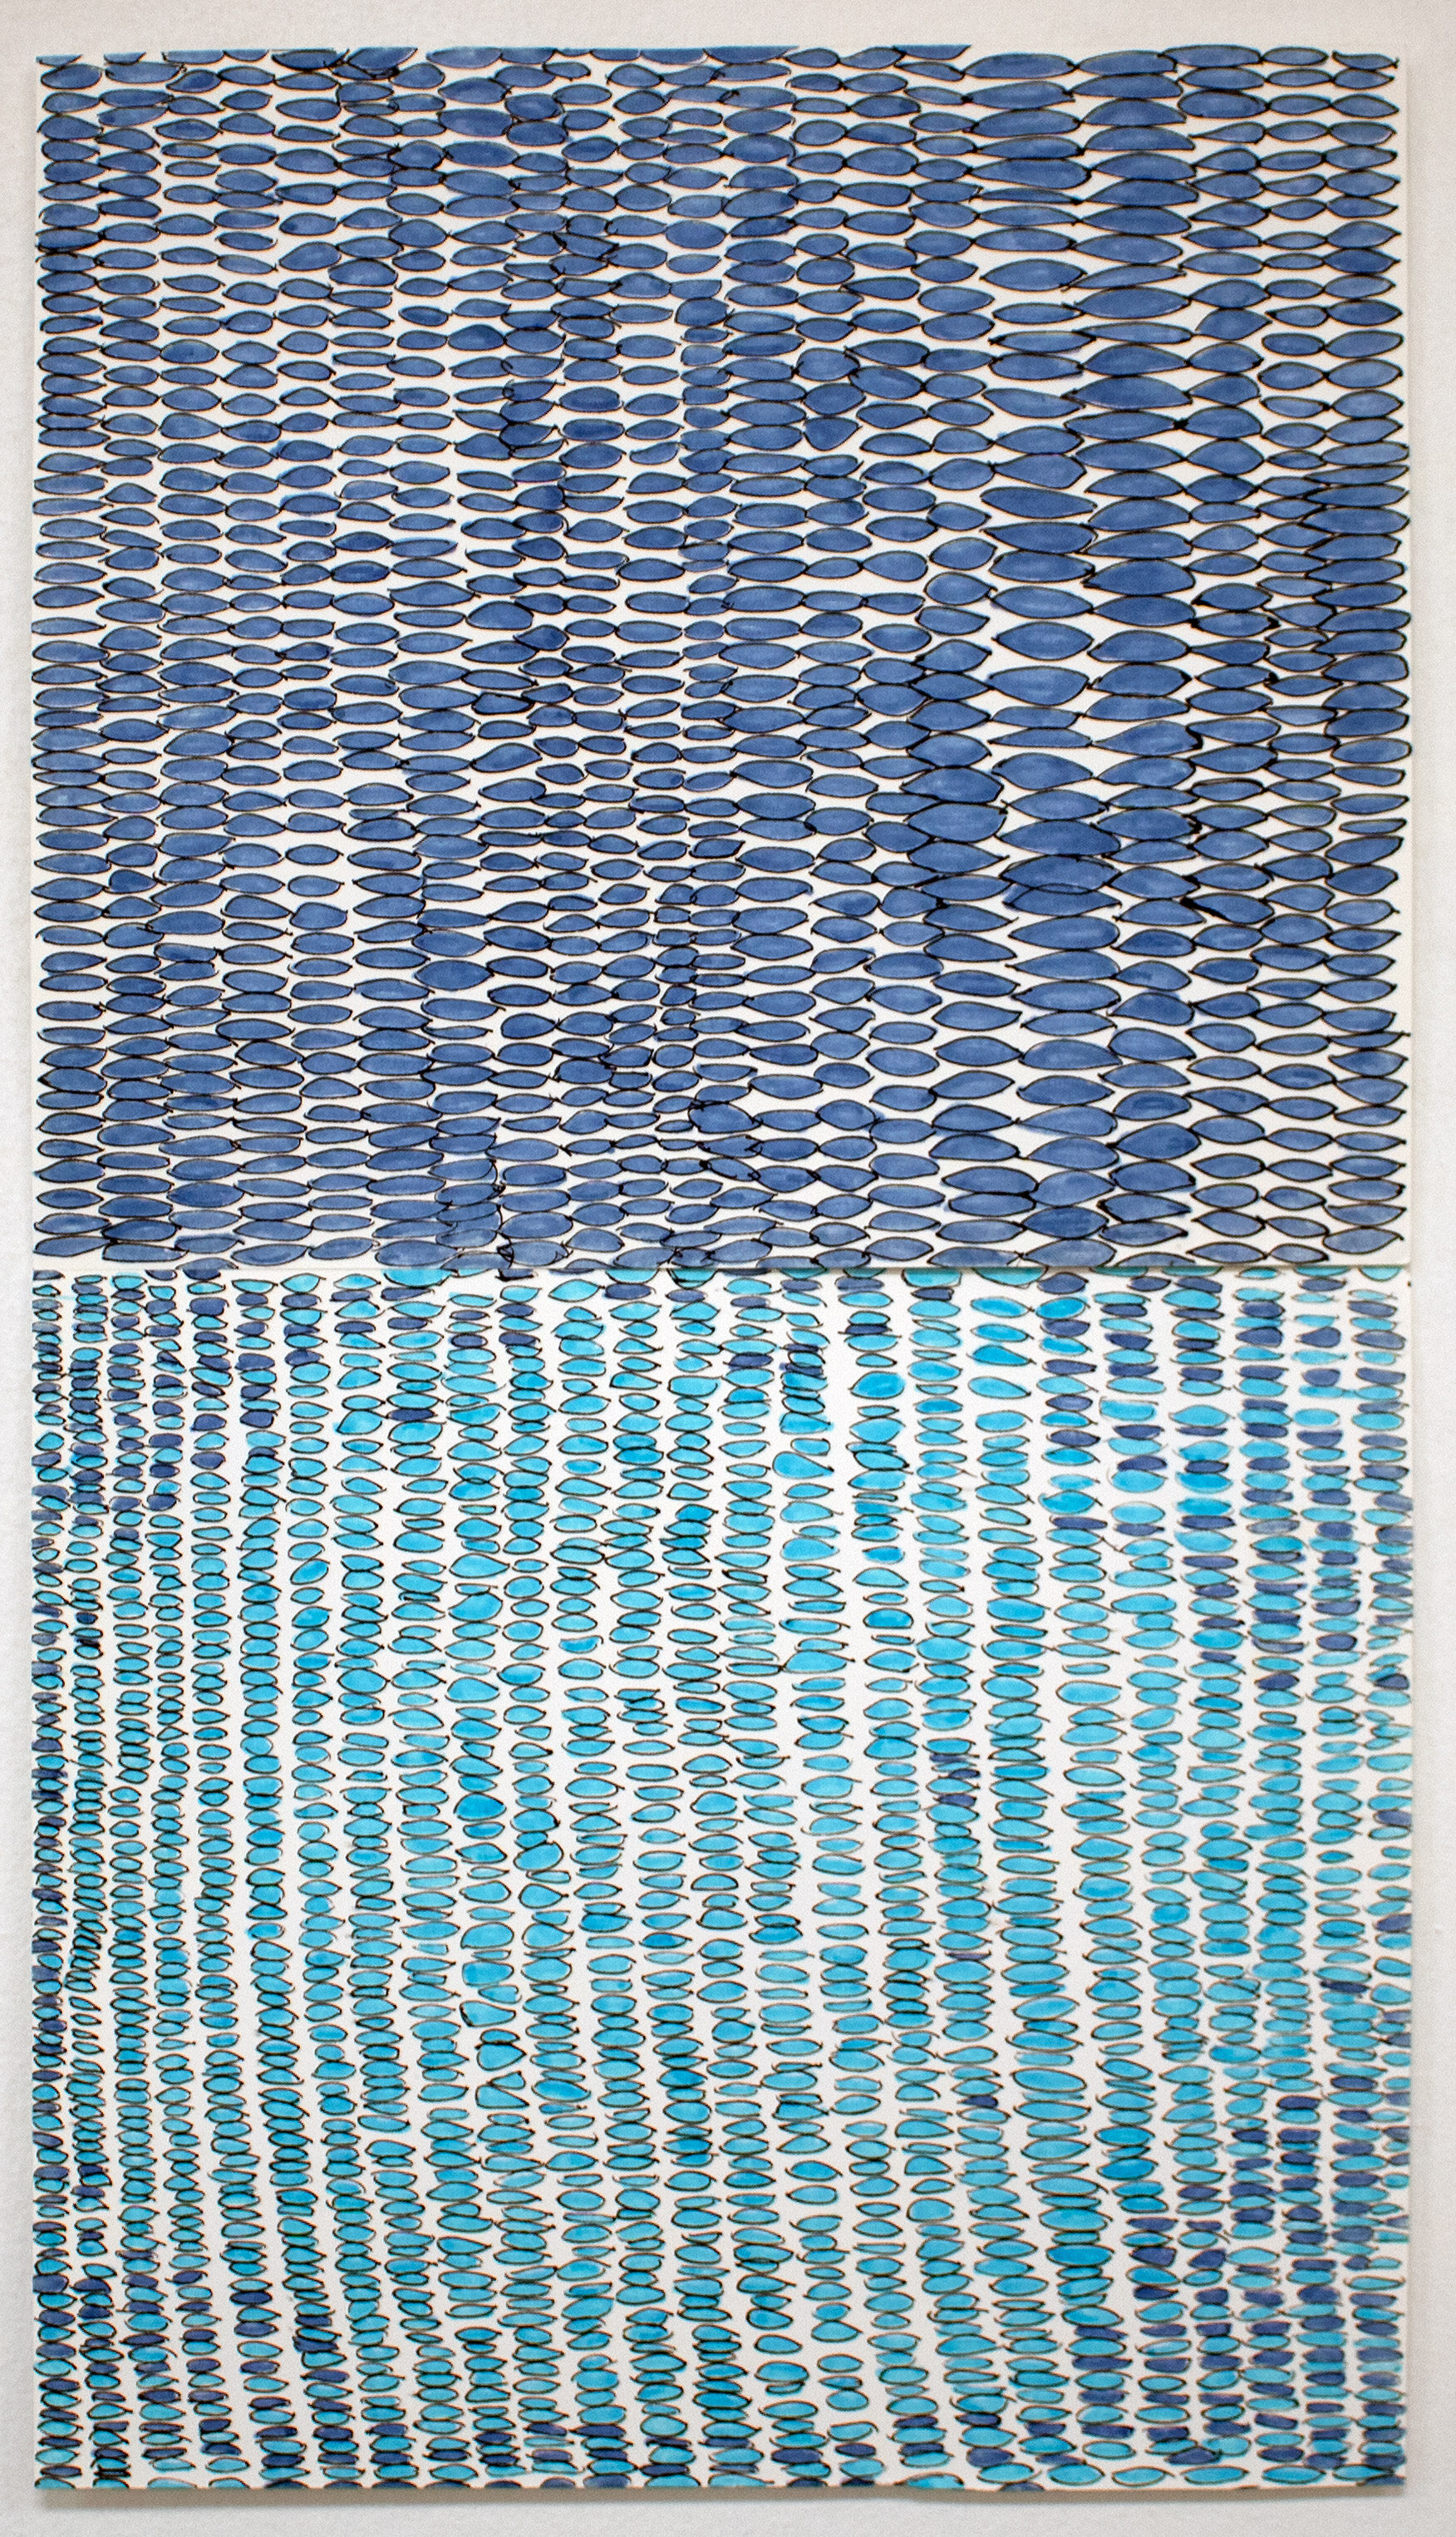    Blue  , 2019, marker on two papers, 15 x 8.5" 